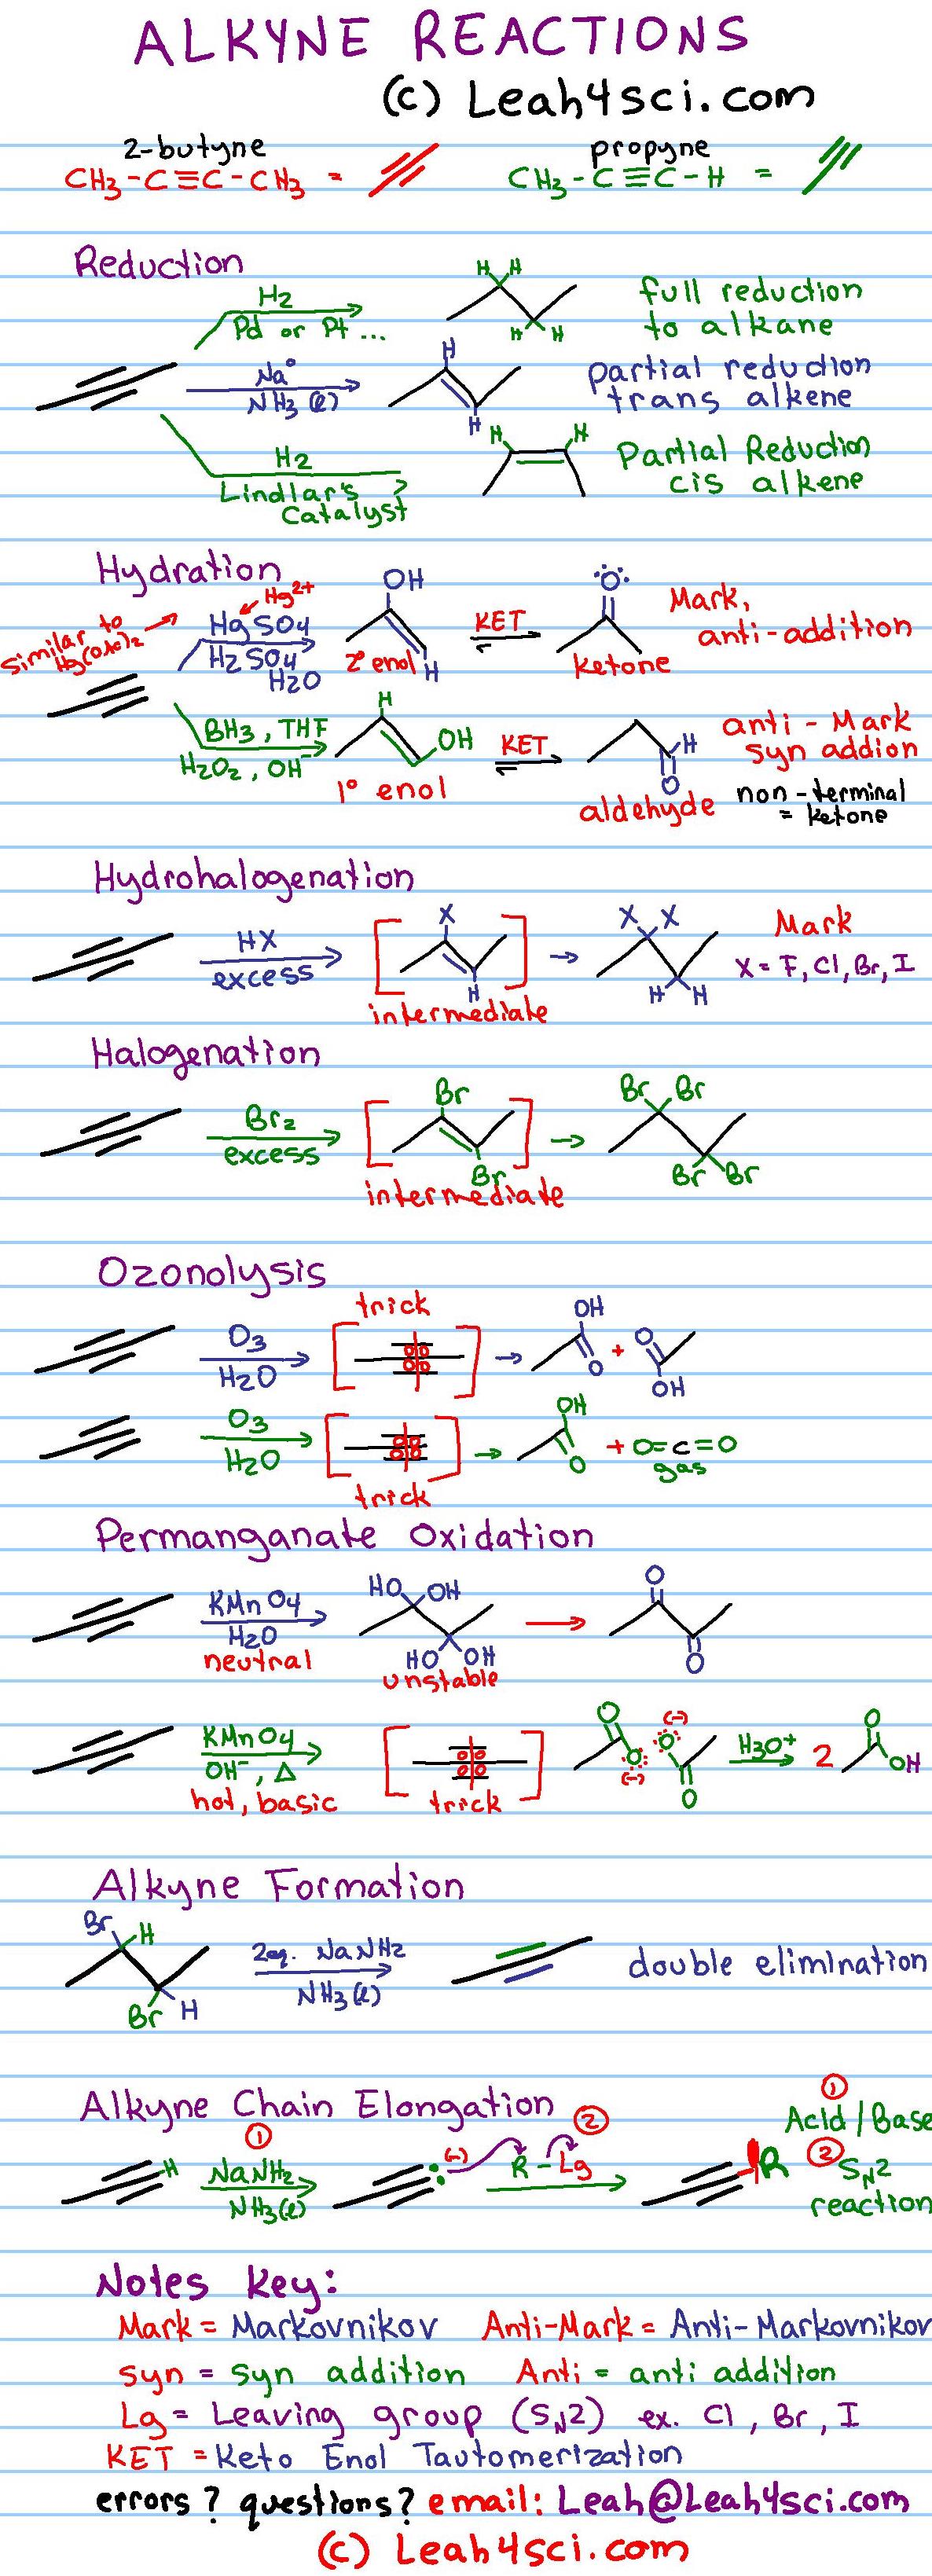 alkyne-reactions-overview-cheat-sheet-organic-chemistry-mcat-and